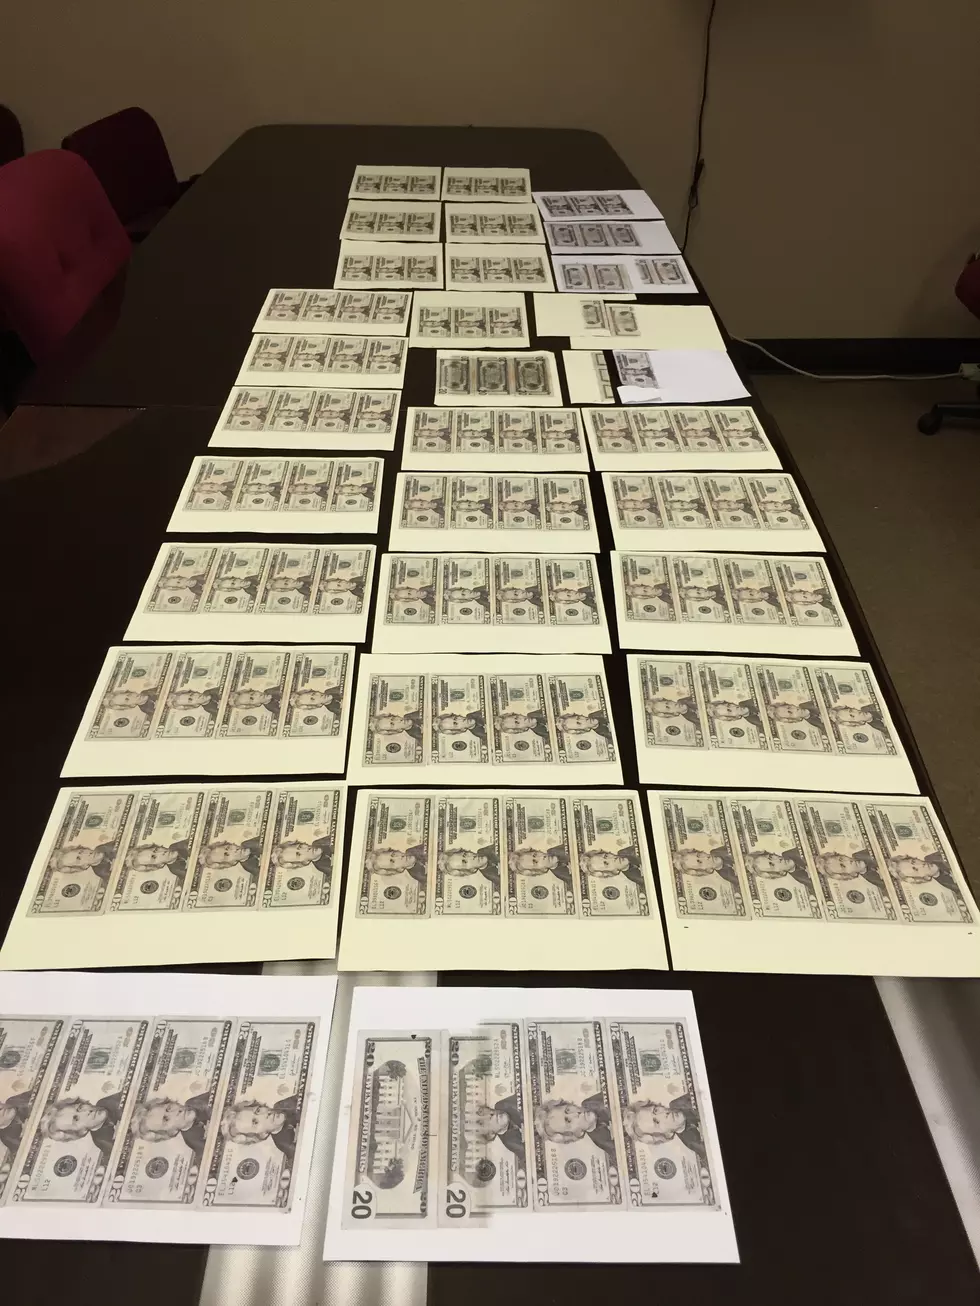 Shoplifing Call Leads to Counterfeit Money Bust